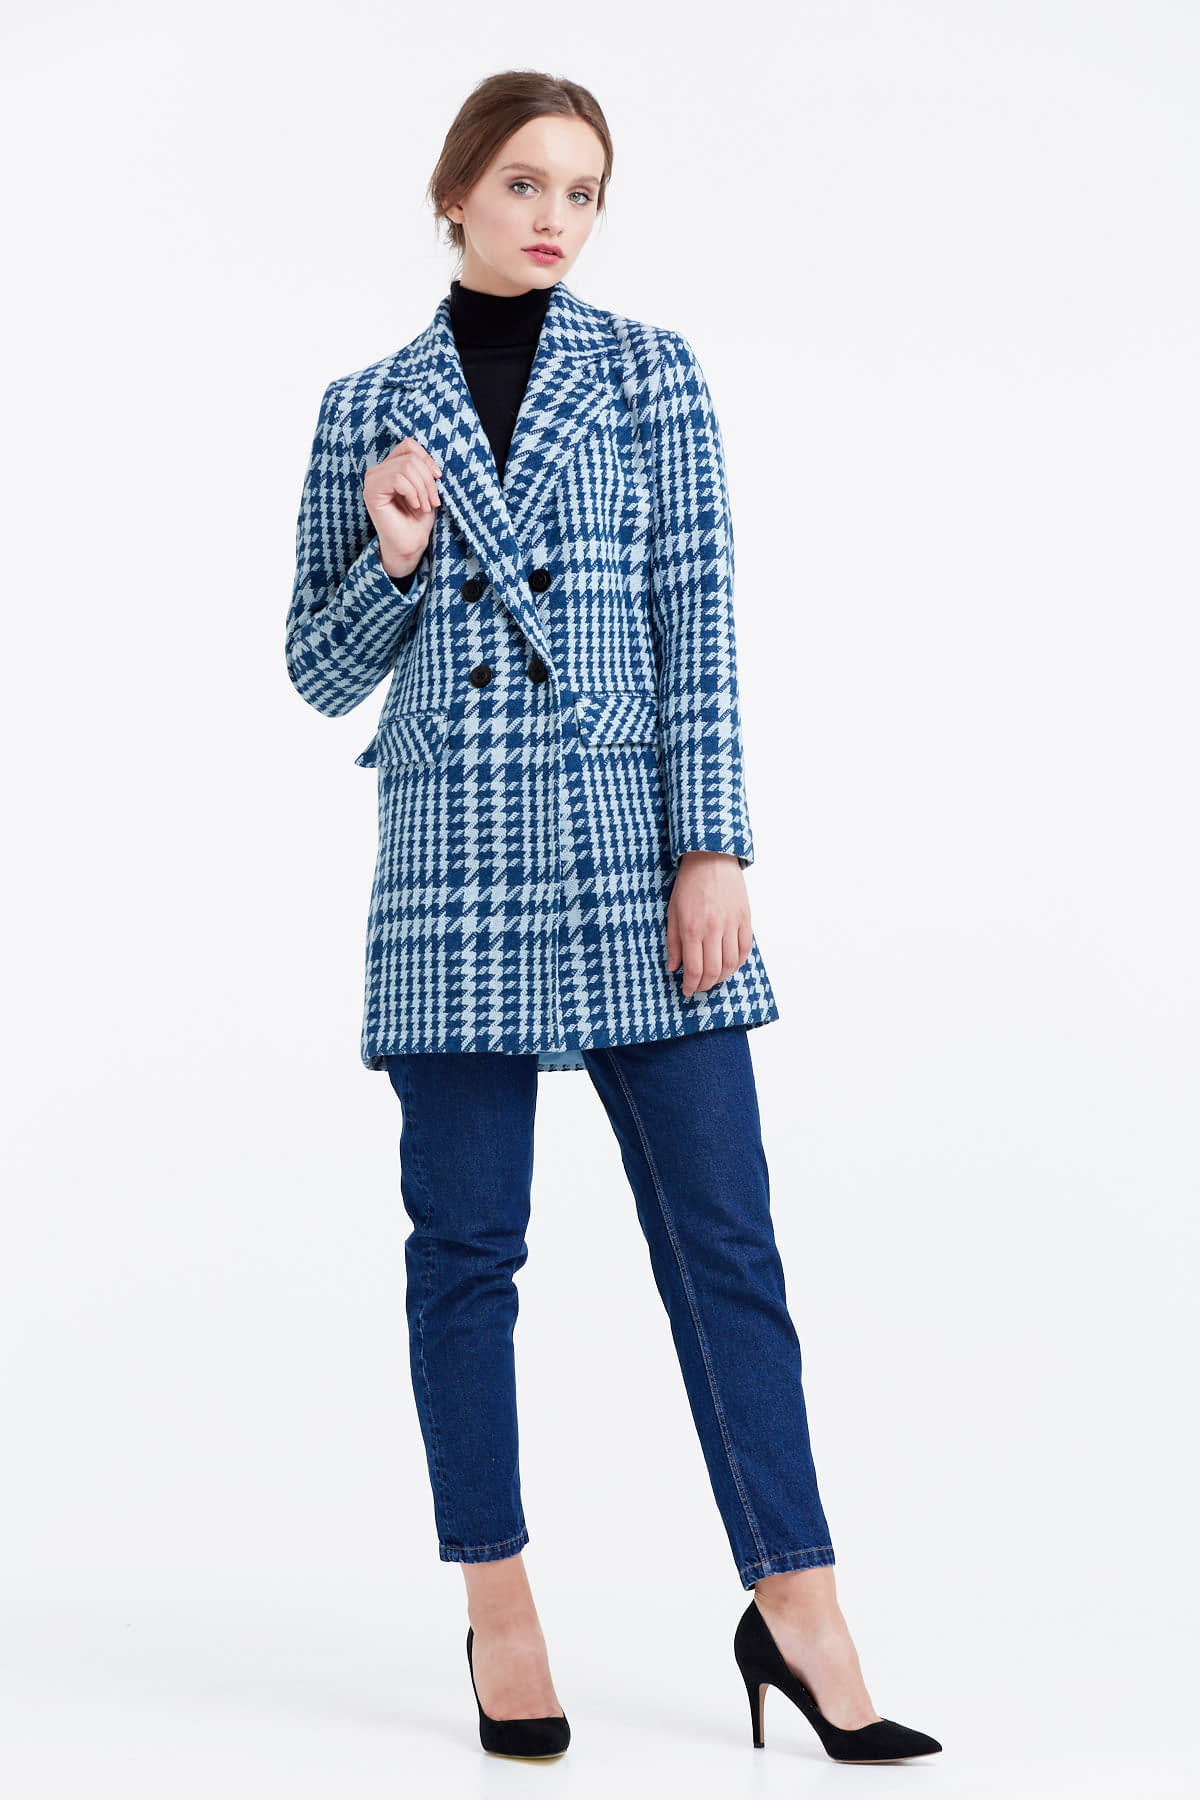 Long double-breasted jacket with a houndstooth print, photo 5